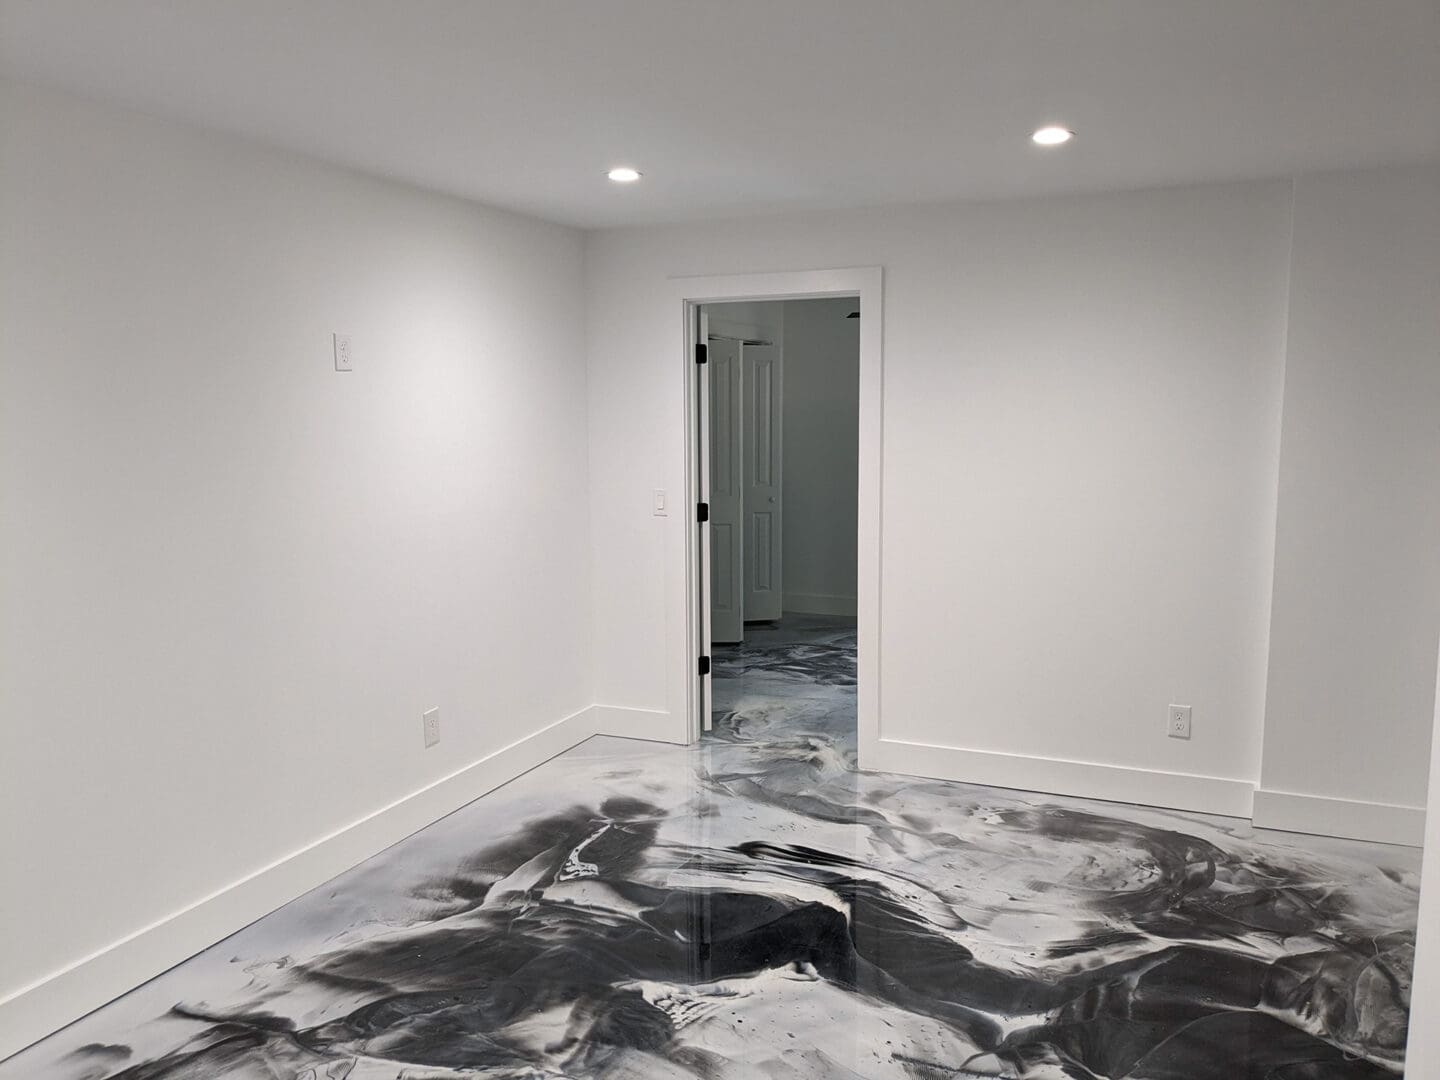 A room with black and white floor in it